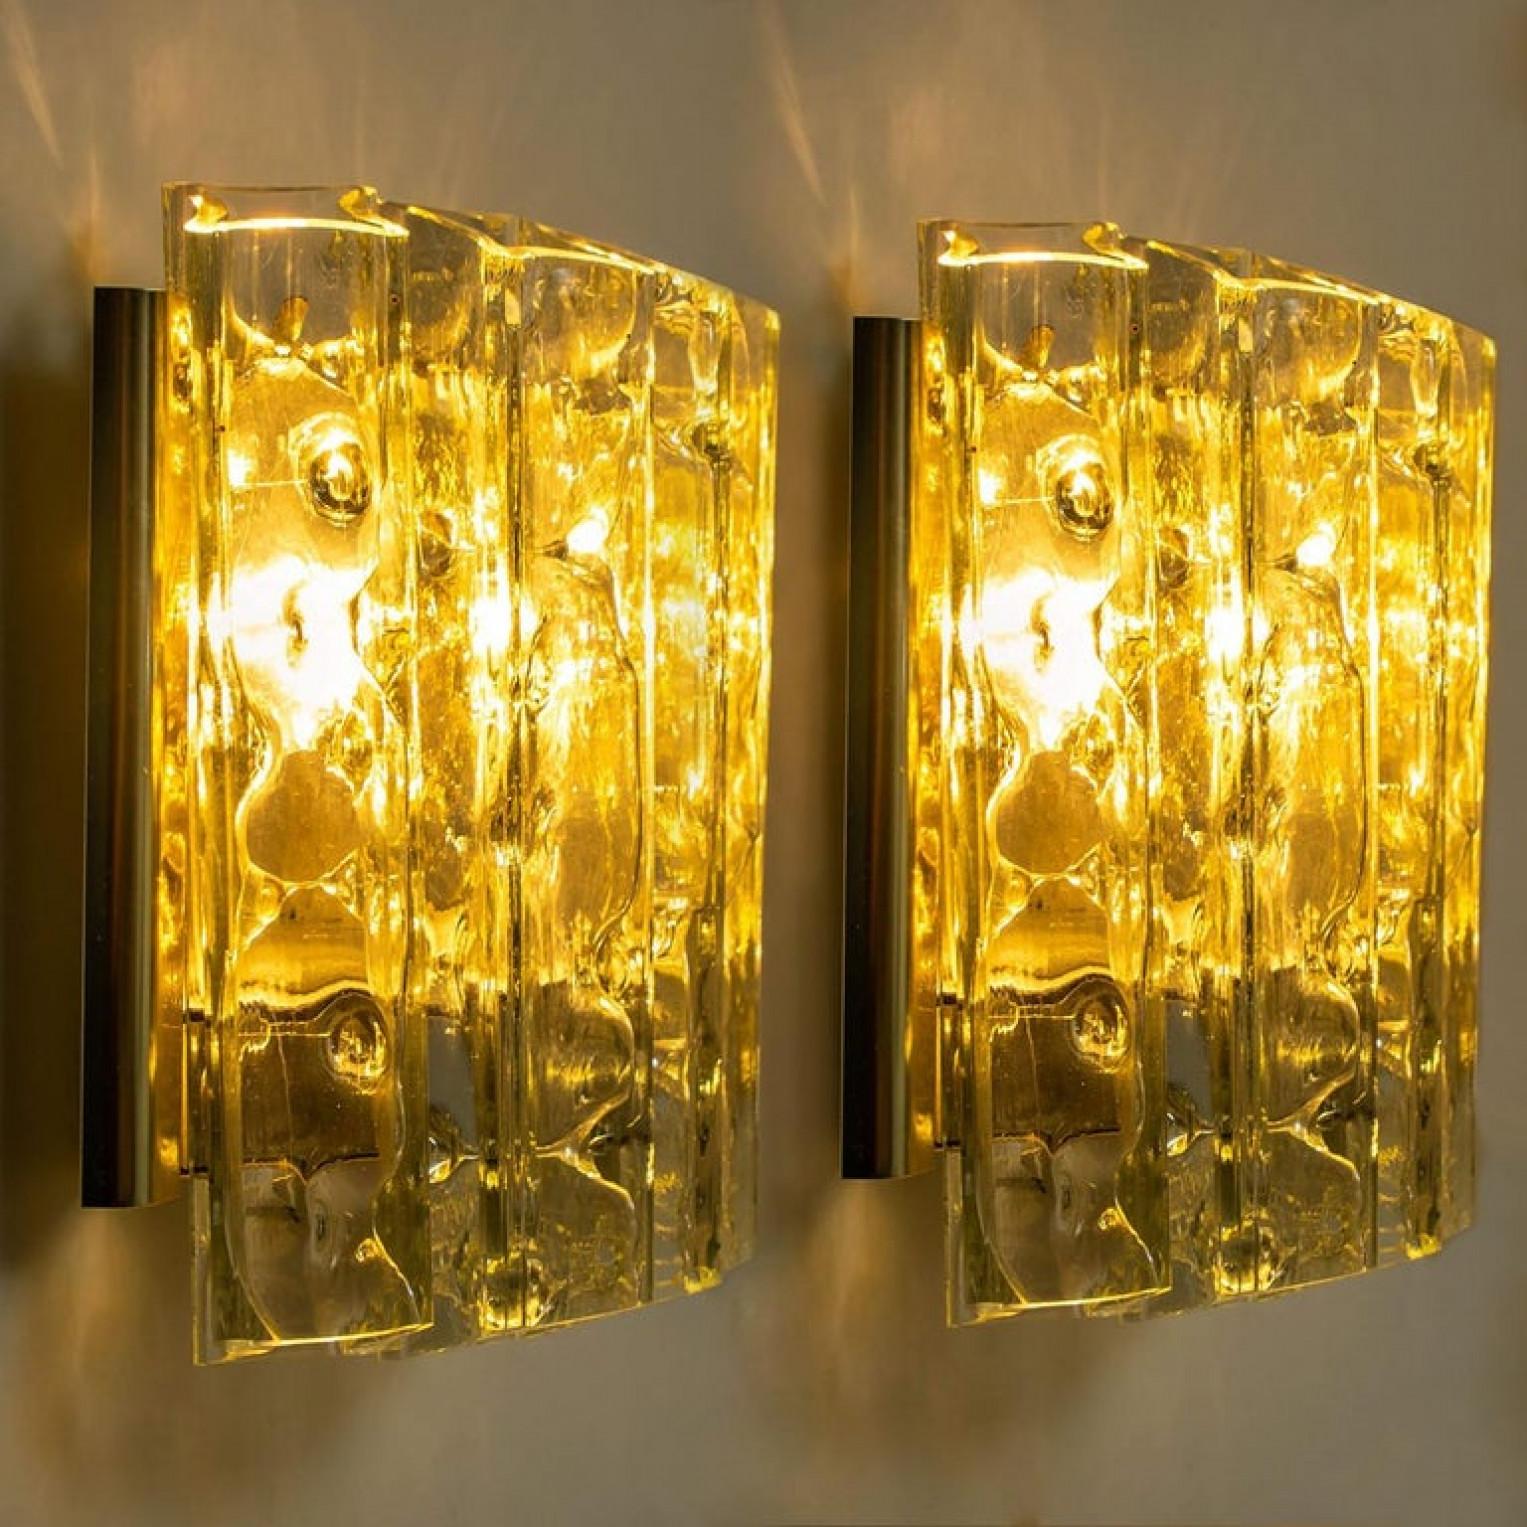 Other Pair of Midcentury Wall Lamps in Brass and Glass, 1970s For Sale